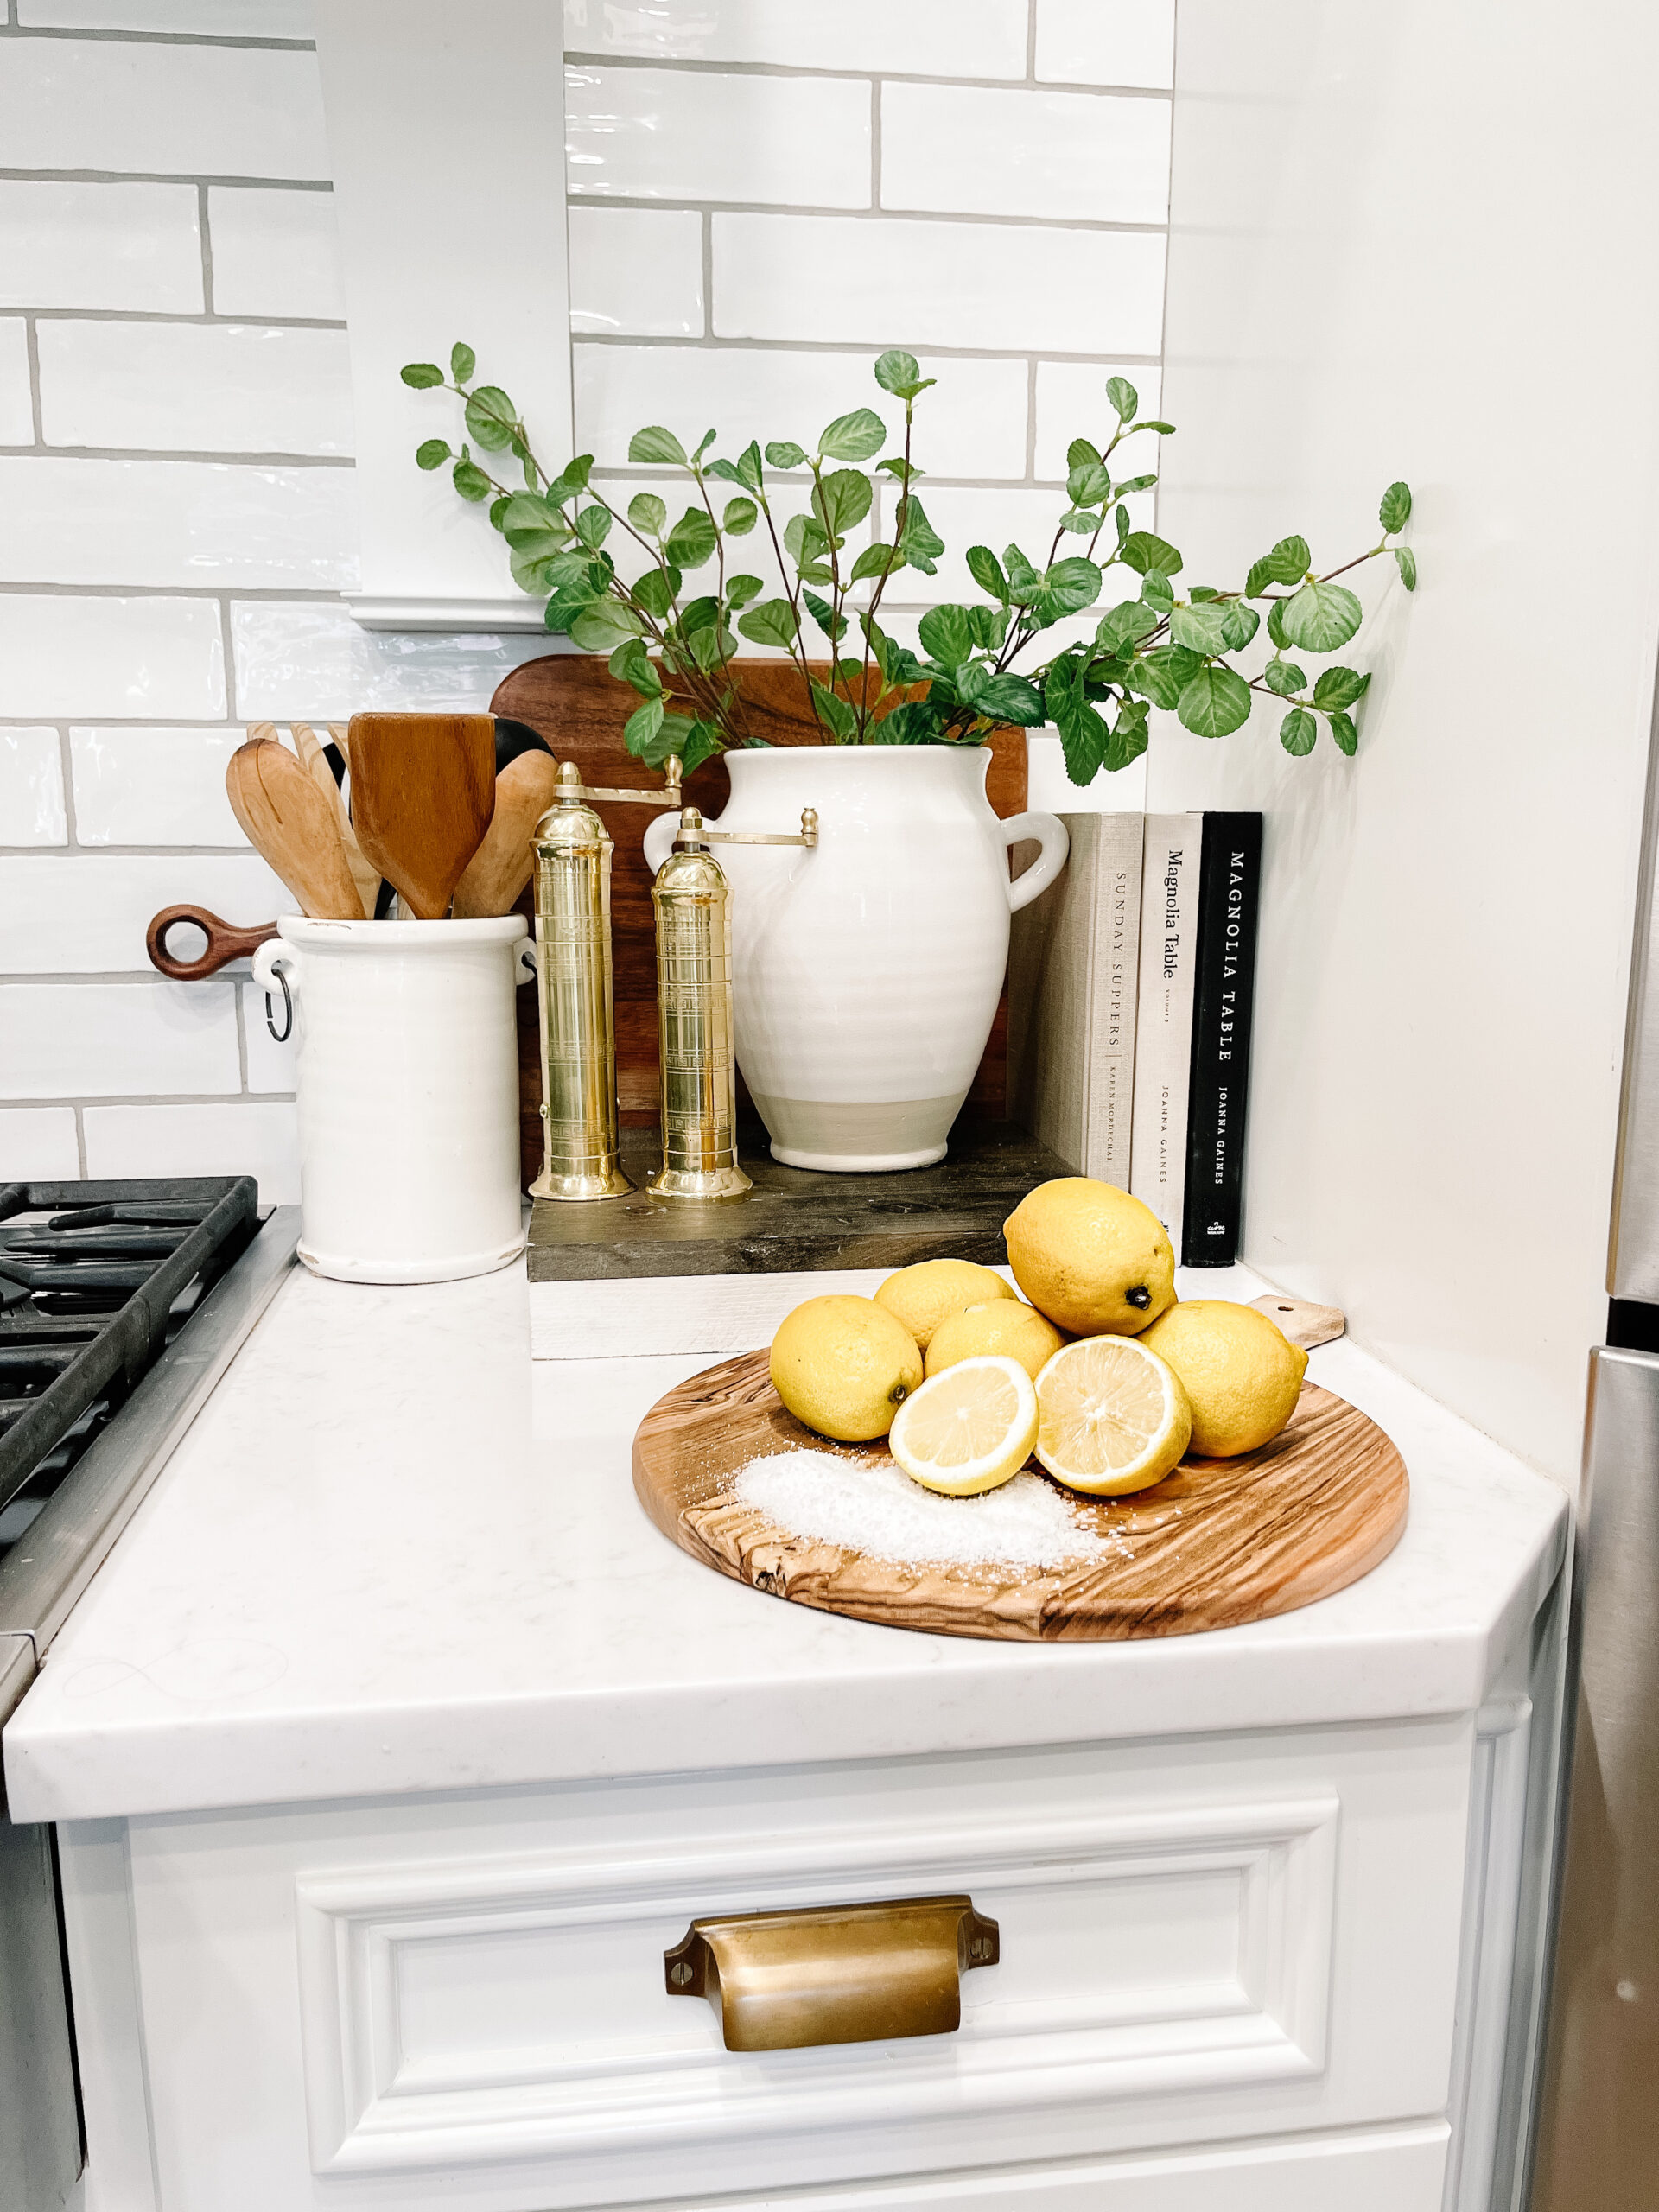 When Life Gives You Lemons!: Cleaning Tips and Tricks Using Lemons